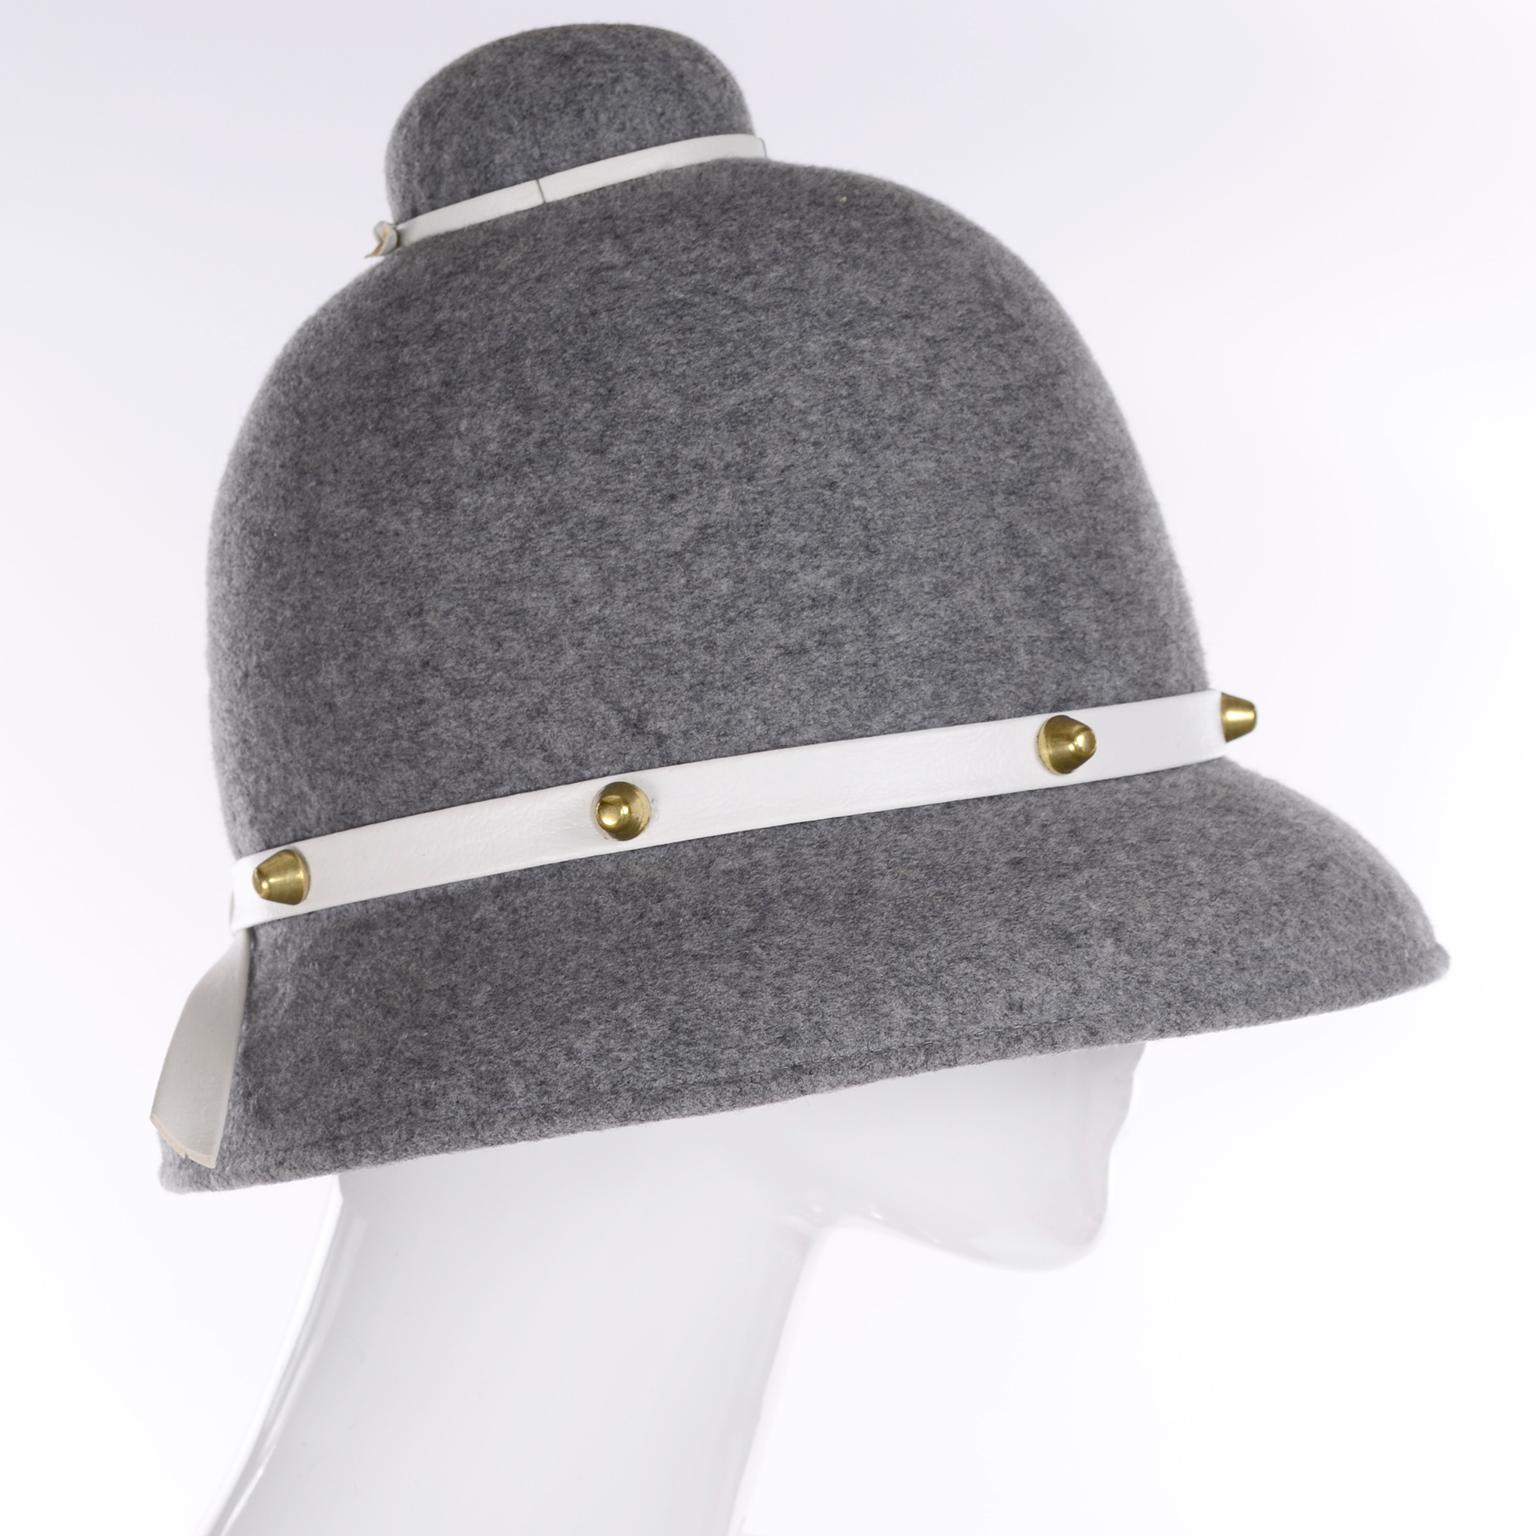 This is a wonderful vintage Mr. John Classic hat in gray wool with leather trim studded with brass.  We love Mr. John hats and this one is a perfect example of the style they brought to millinery in the mid century. This hat measures 22